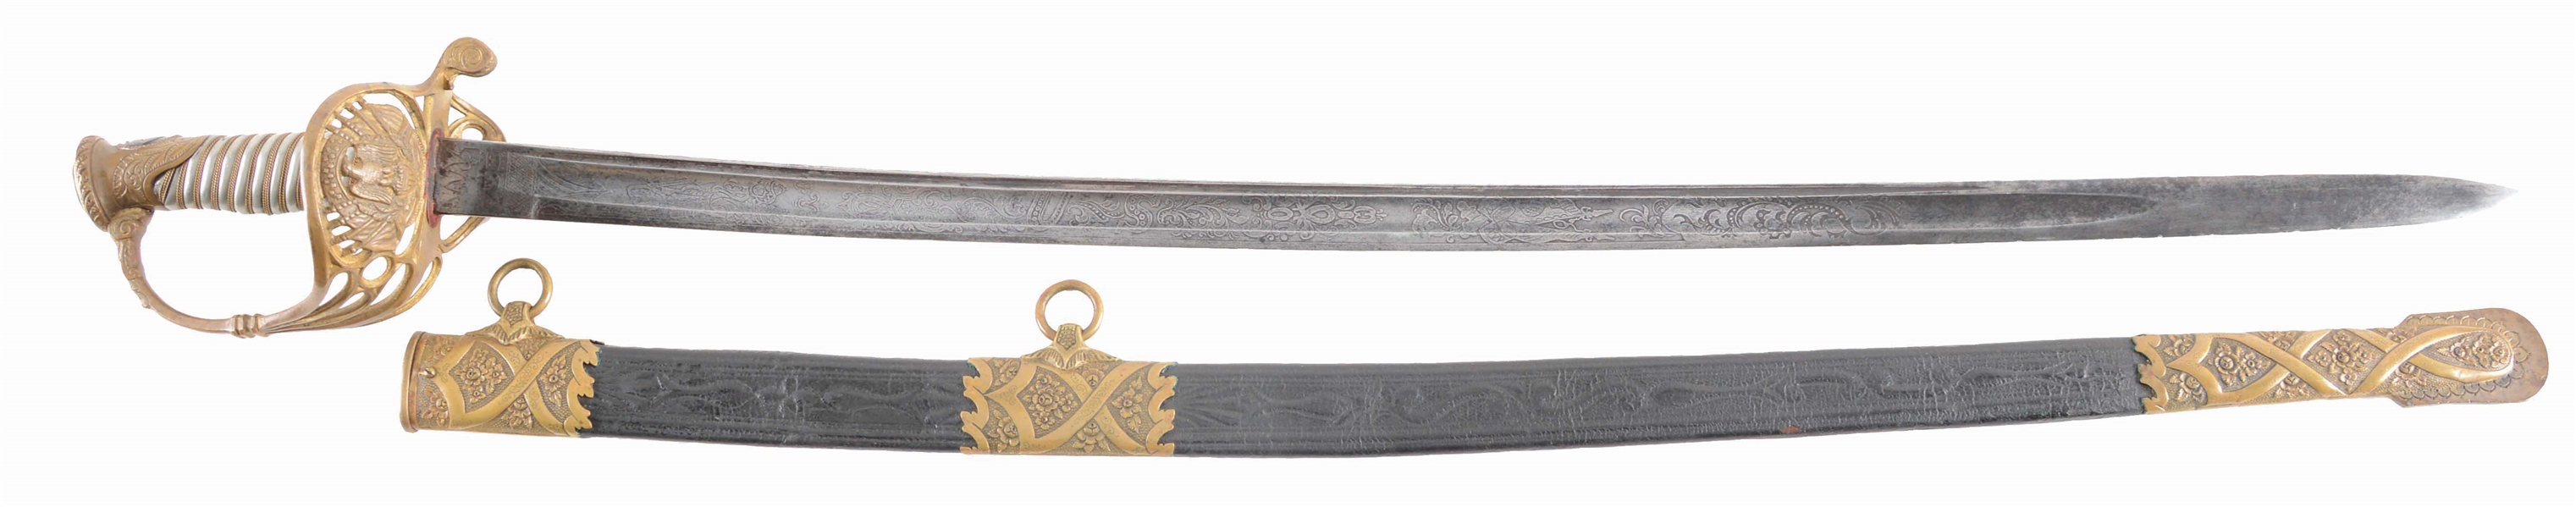 AN EXTREMELY UNUSUAL, POSSIBLY UNIQUE, CIVIL WAR OFFICERS SWORD WITH BLADE ETCHED WITH A BATTLE SCENE FEATURING UNION TROOPS WITH ARTILLERY VERSUS CONFEDERATES, WHO ARE SURRENDERING.